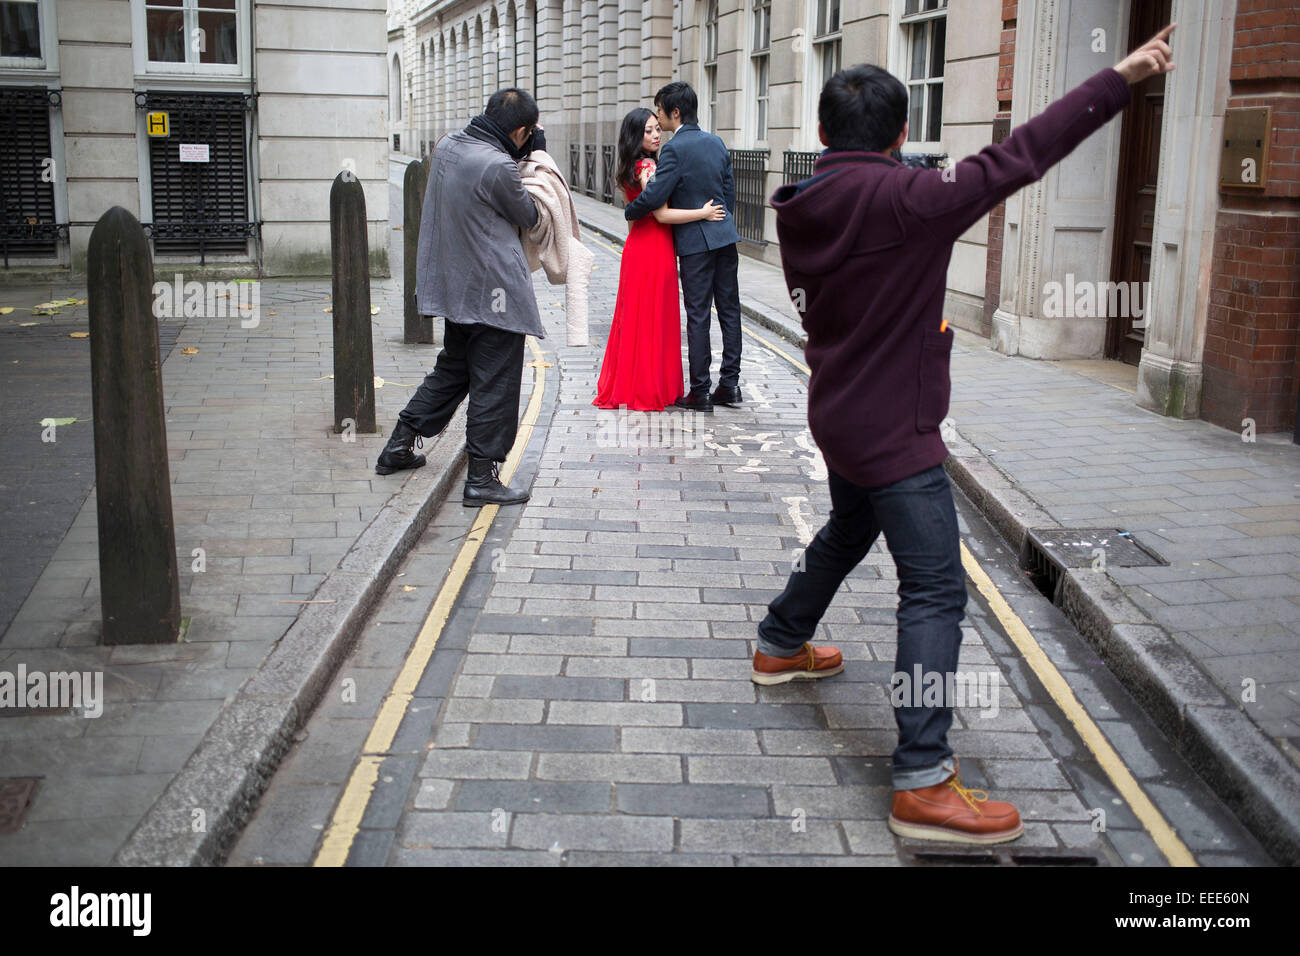 Asian photographer photographing a Chinese couple for their wedding pictures. London, UK. This is a common sight as couples from Asia have their photographs done as before their actual wedding day wearing their dress and suit. Stock Photo